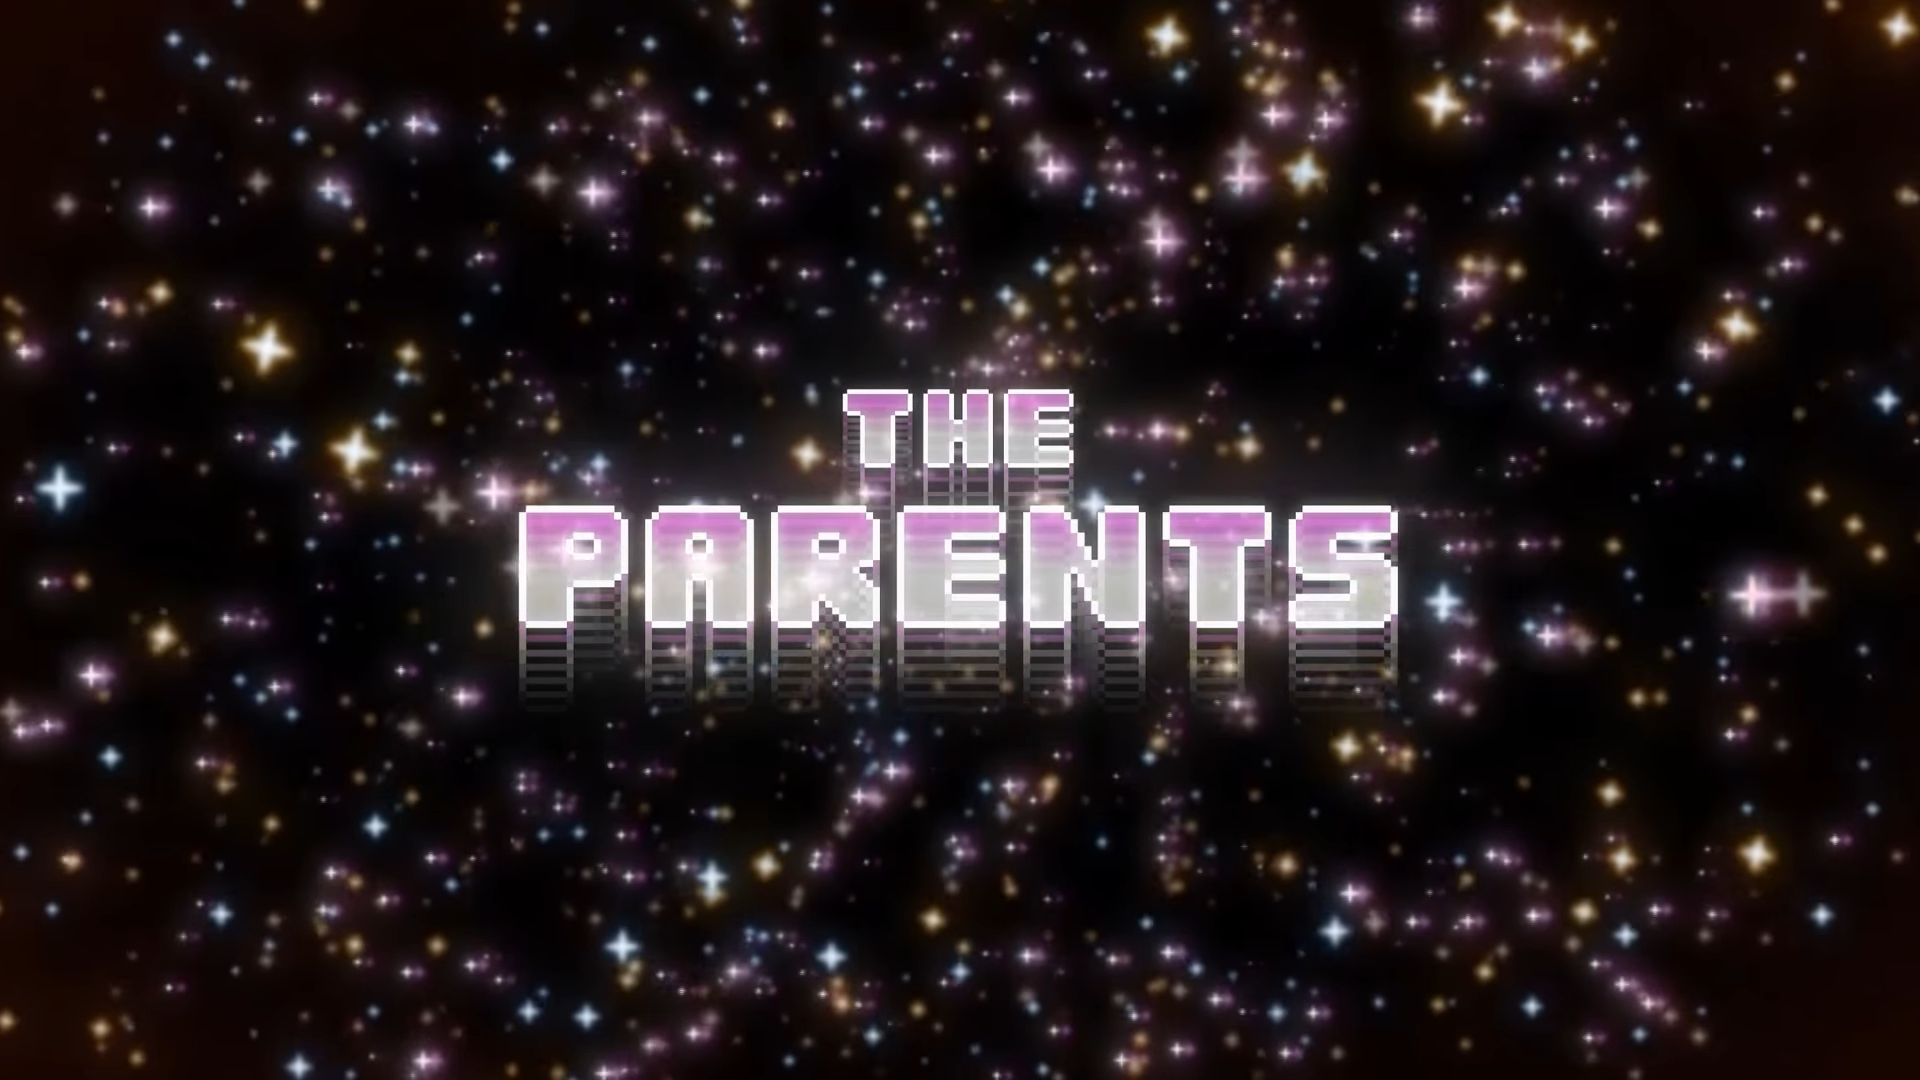 The Parents, The Amazing World of Gumball Wiki